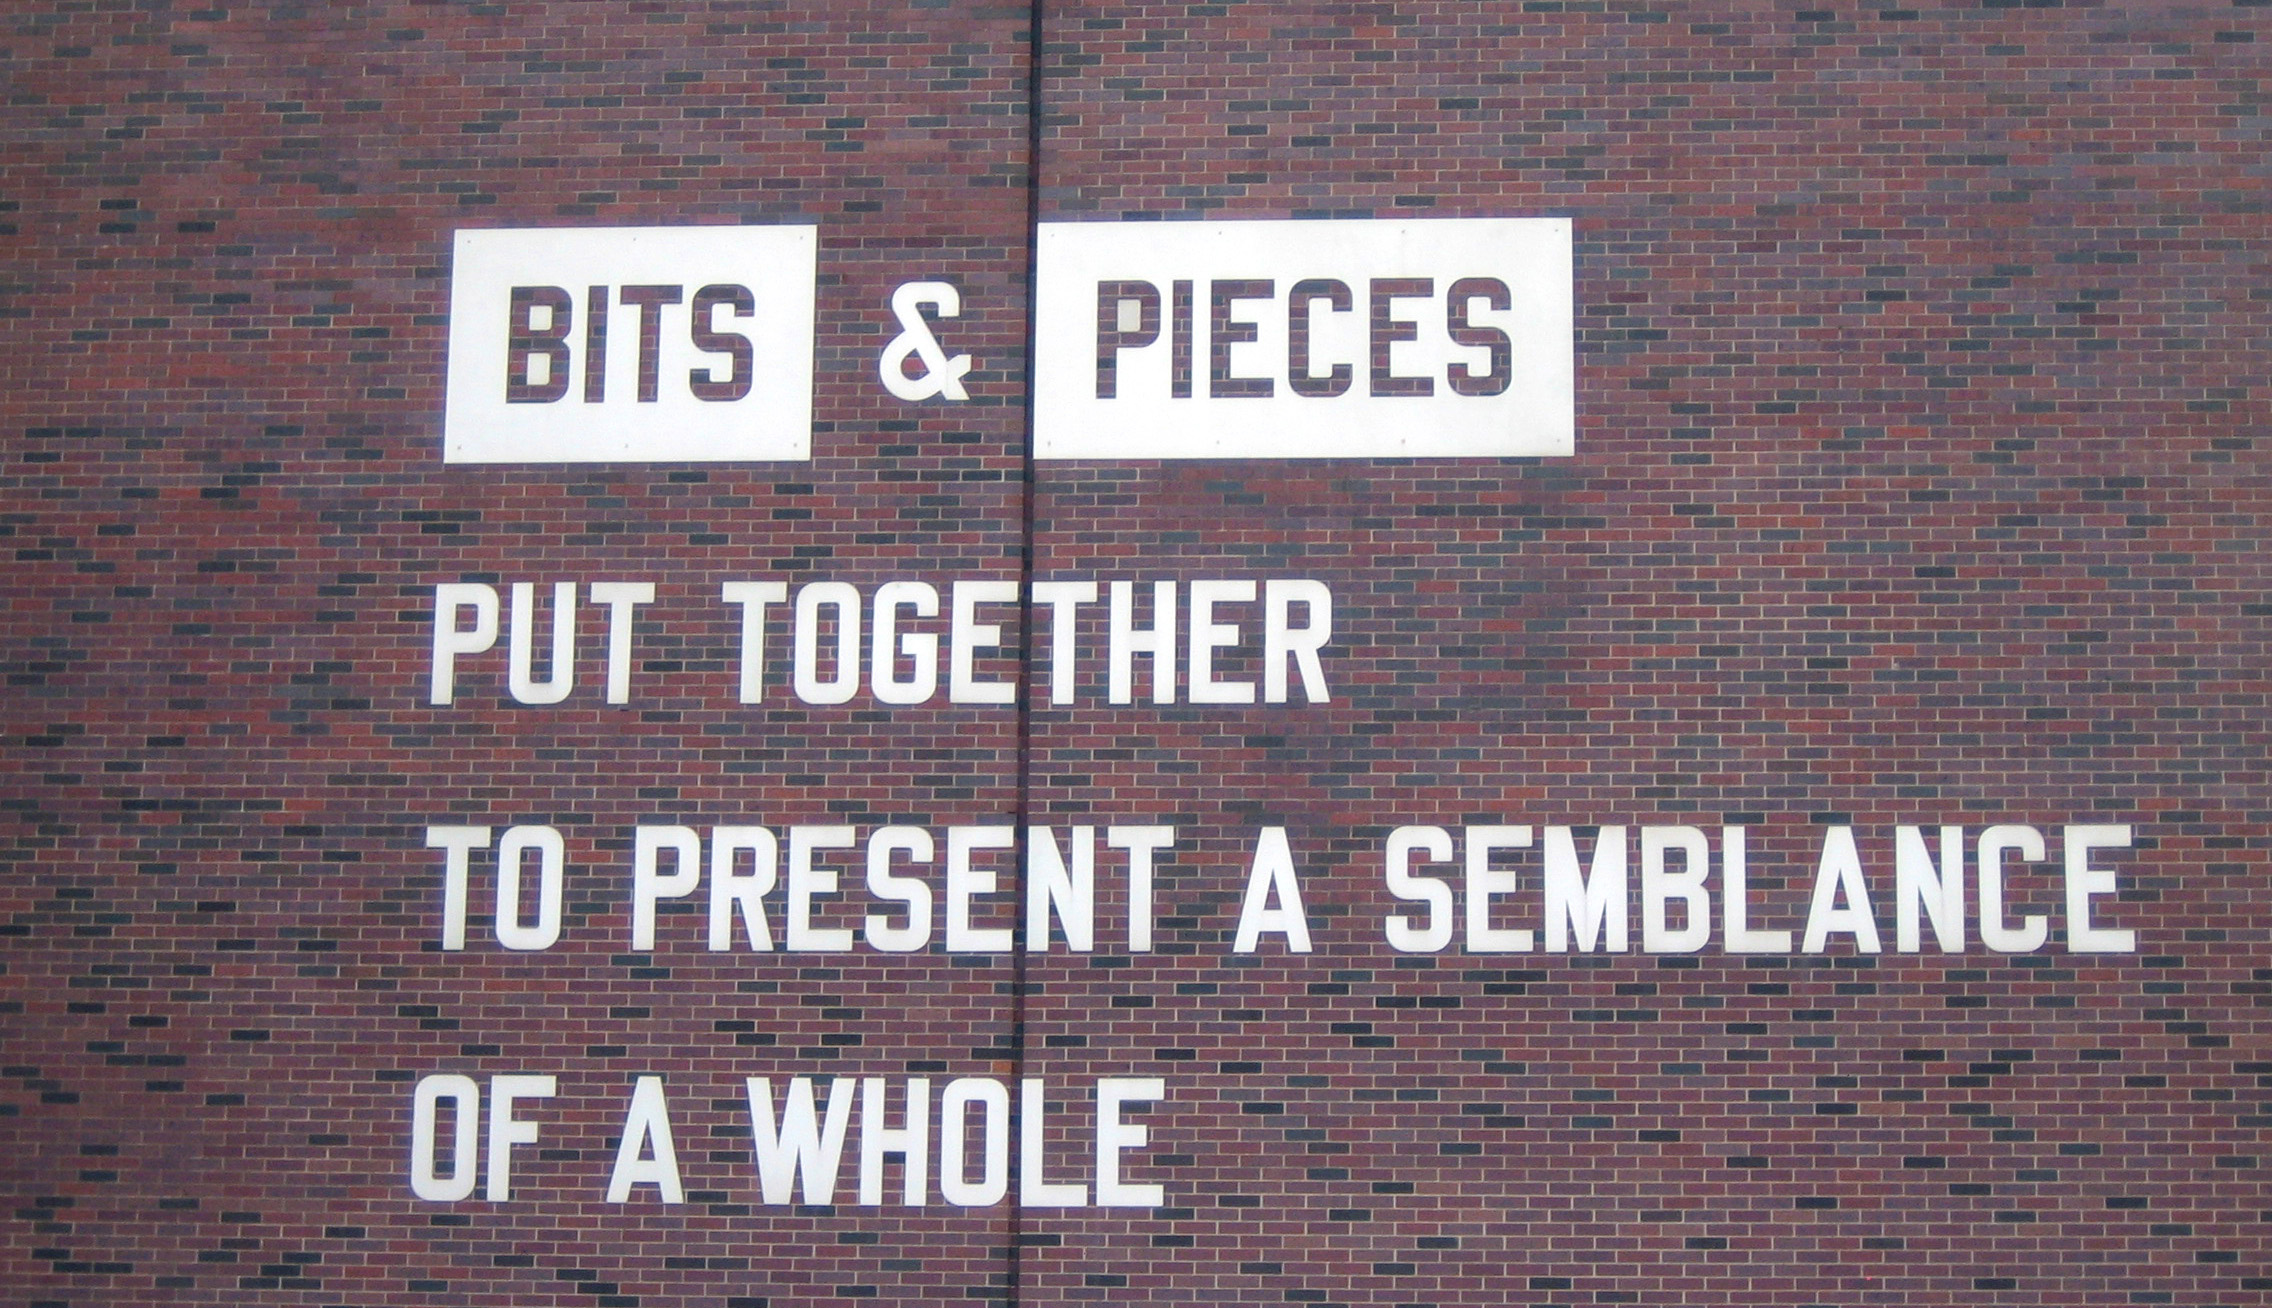 Brick wall with painted letters that read "Bits & Pieces put together to present a semblance of a whole."